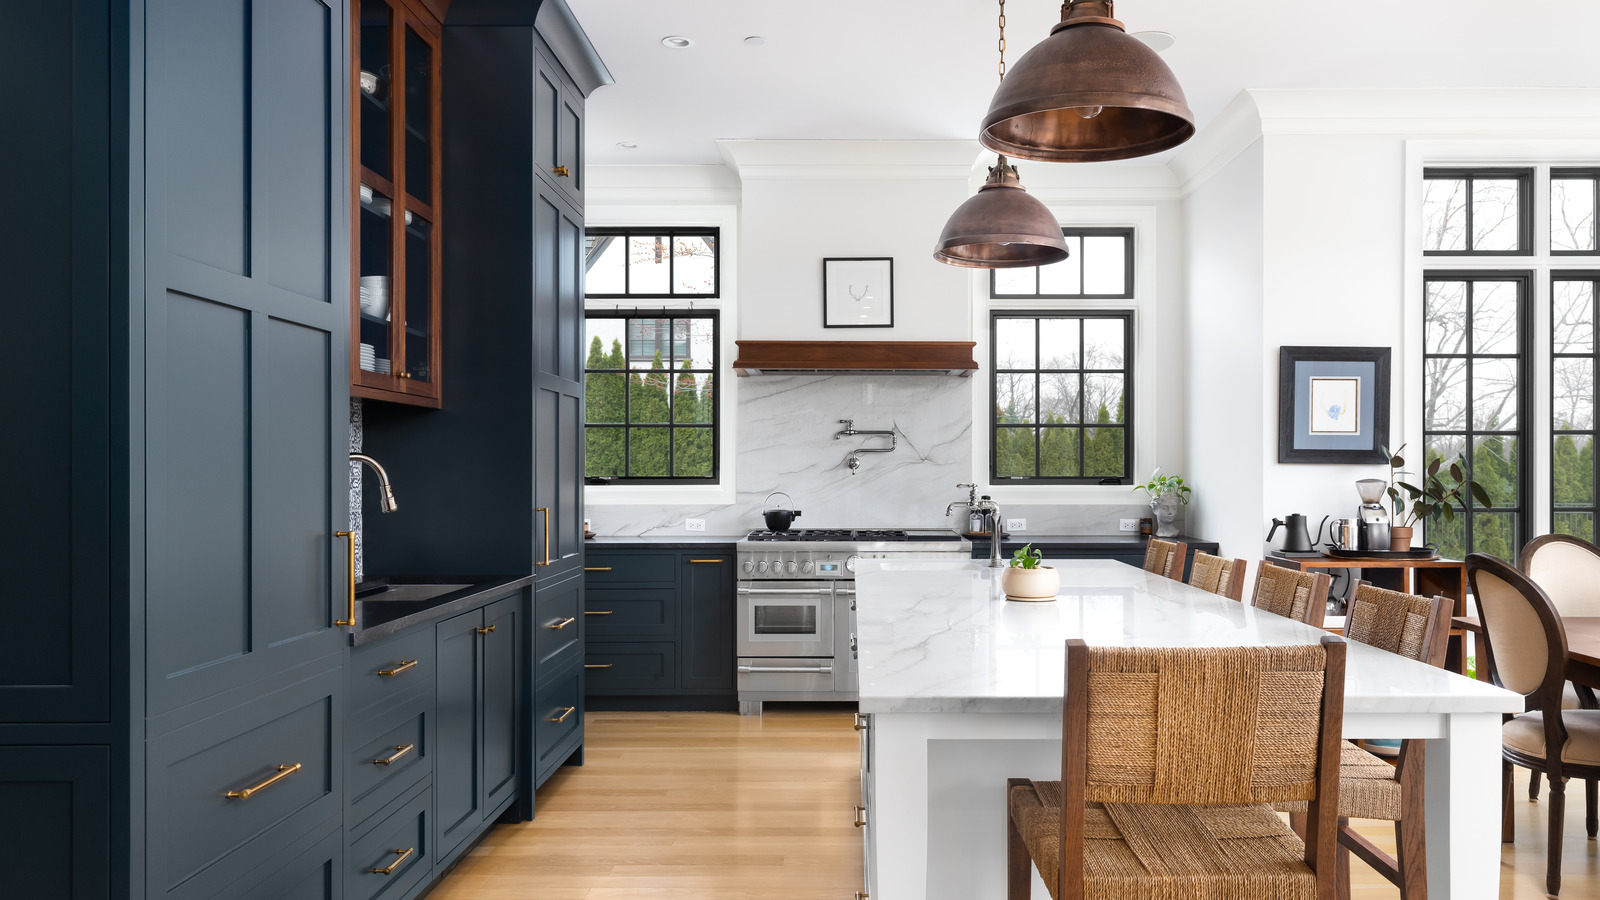 10 Ideas to Remodel a Kitchen on a Budget